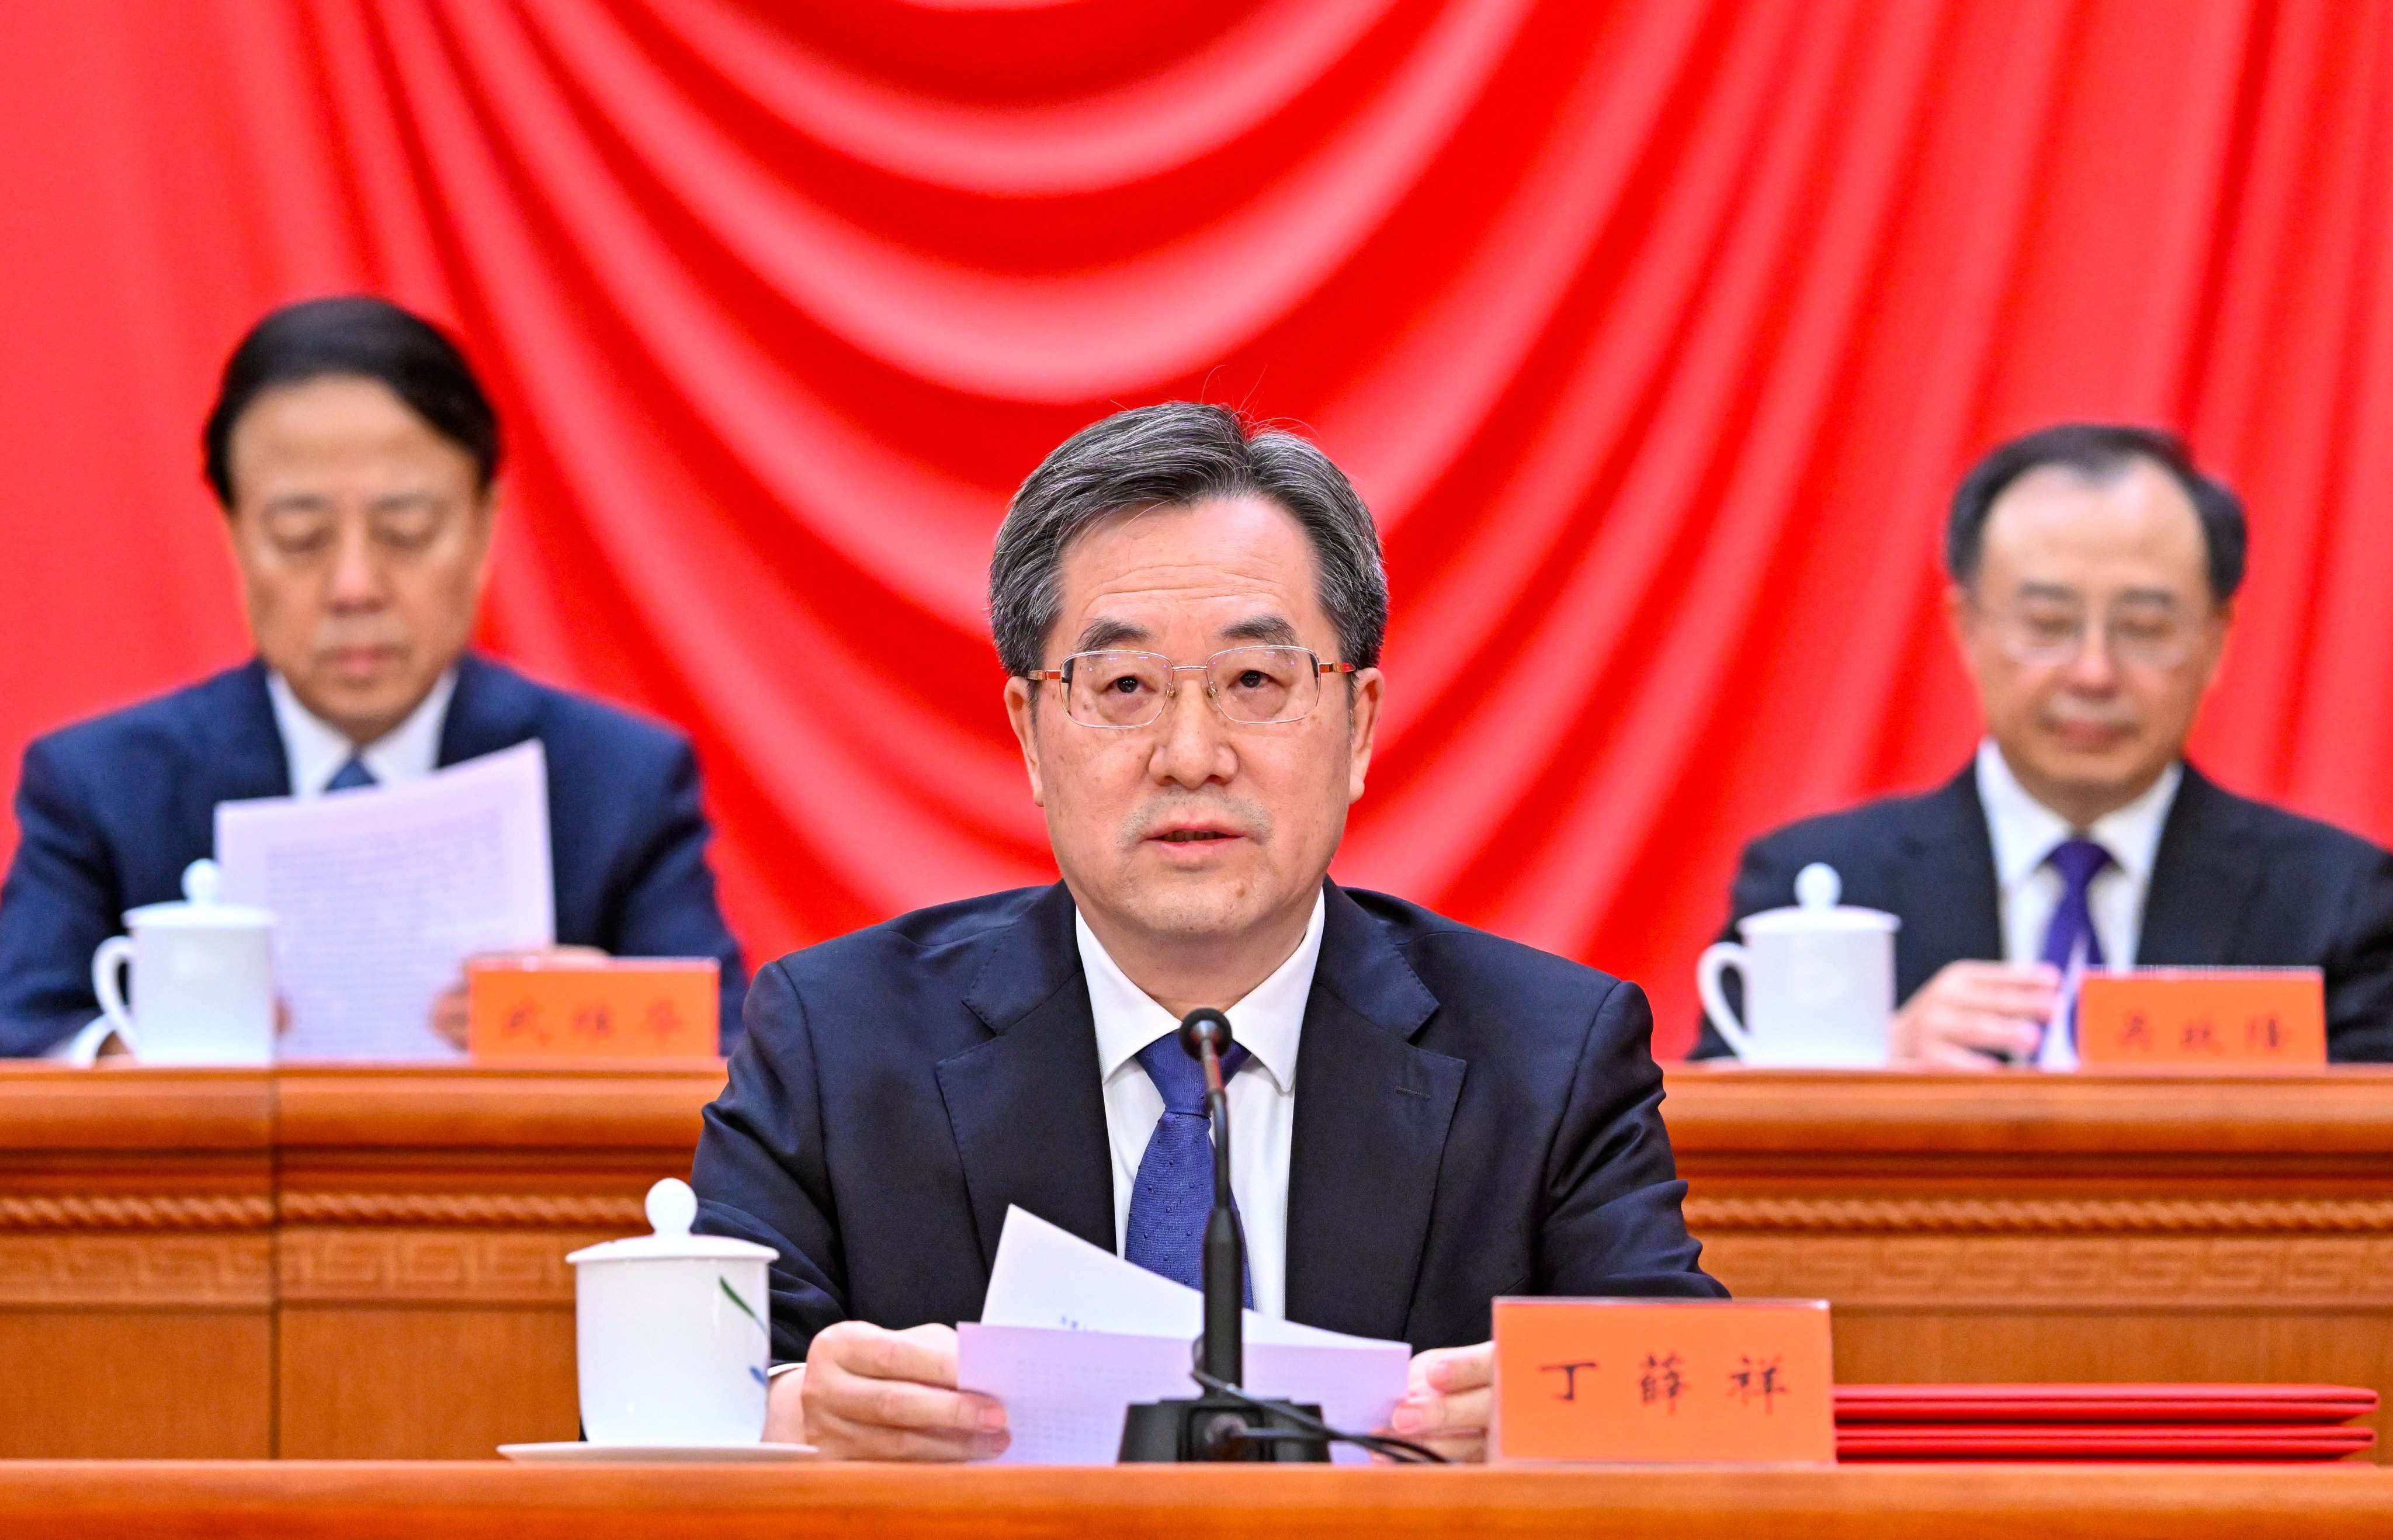 Executive Vice-Premier Ding Xuexiang addresses the country’s top scientists in Beijing on 
Monday in his role as head of the party’s Central Science and Technology Commission. Photo: Xinhua